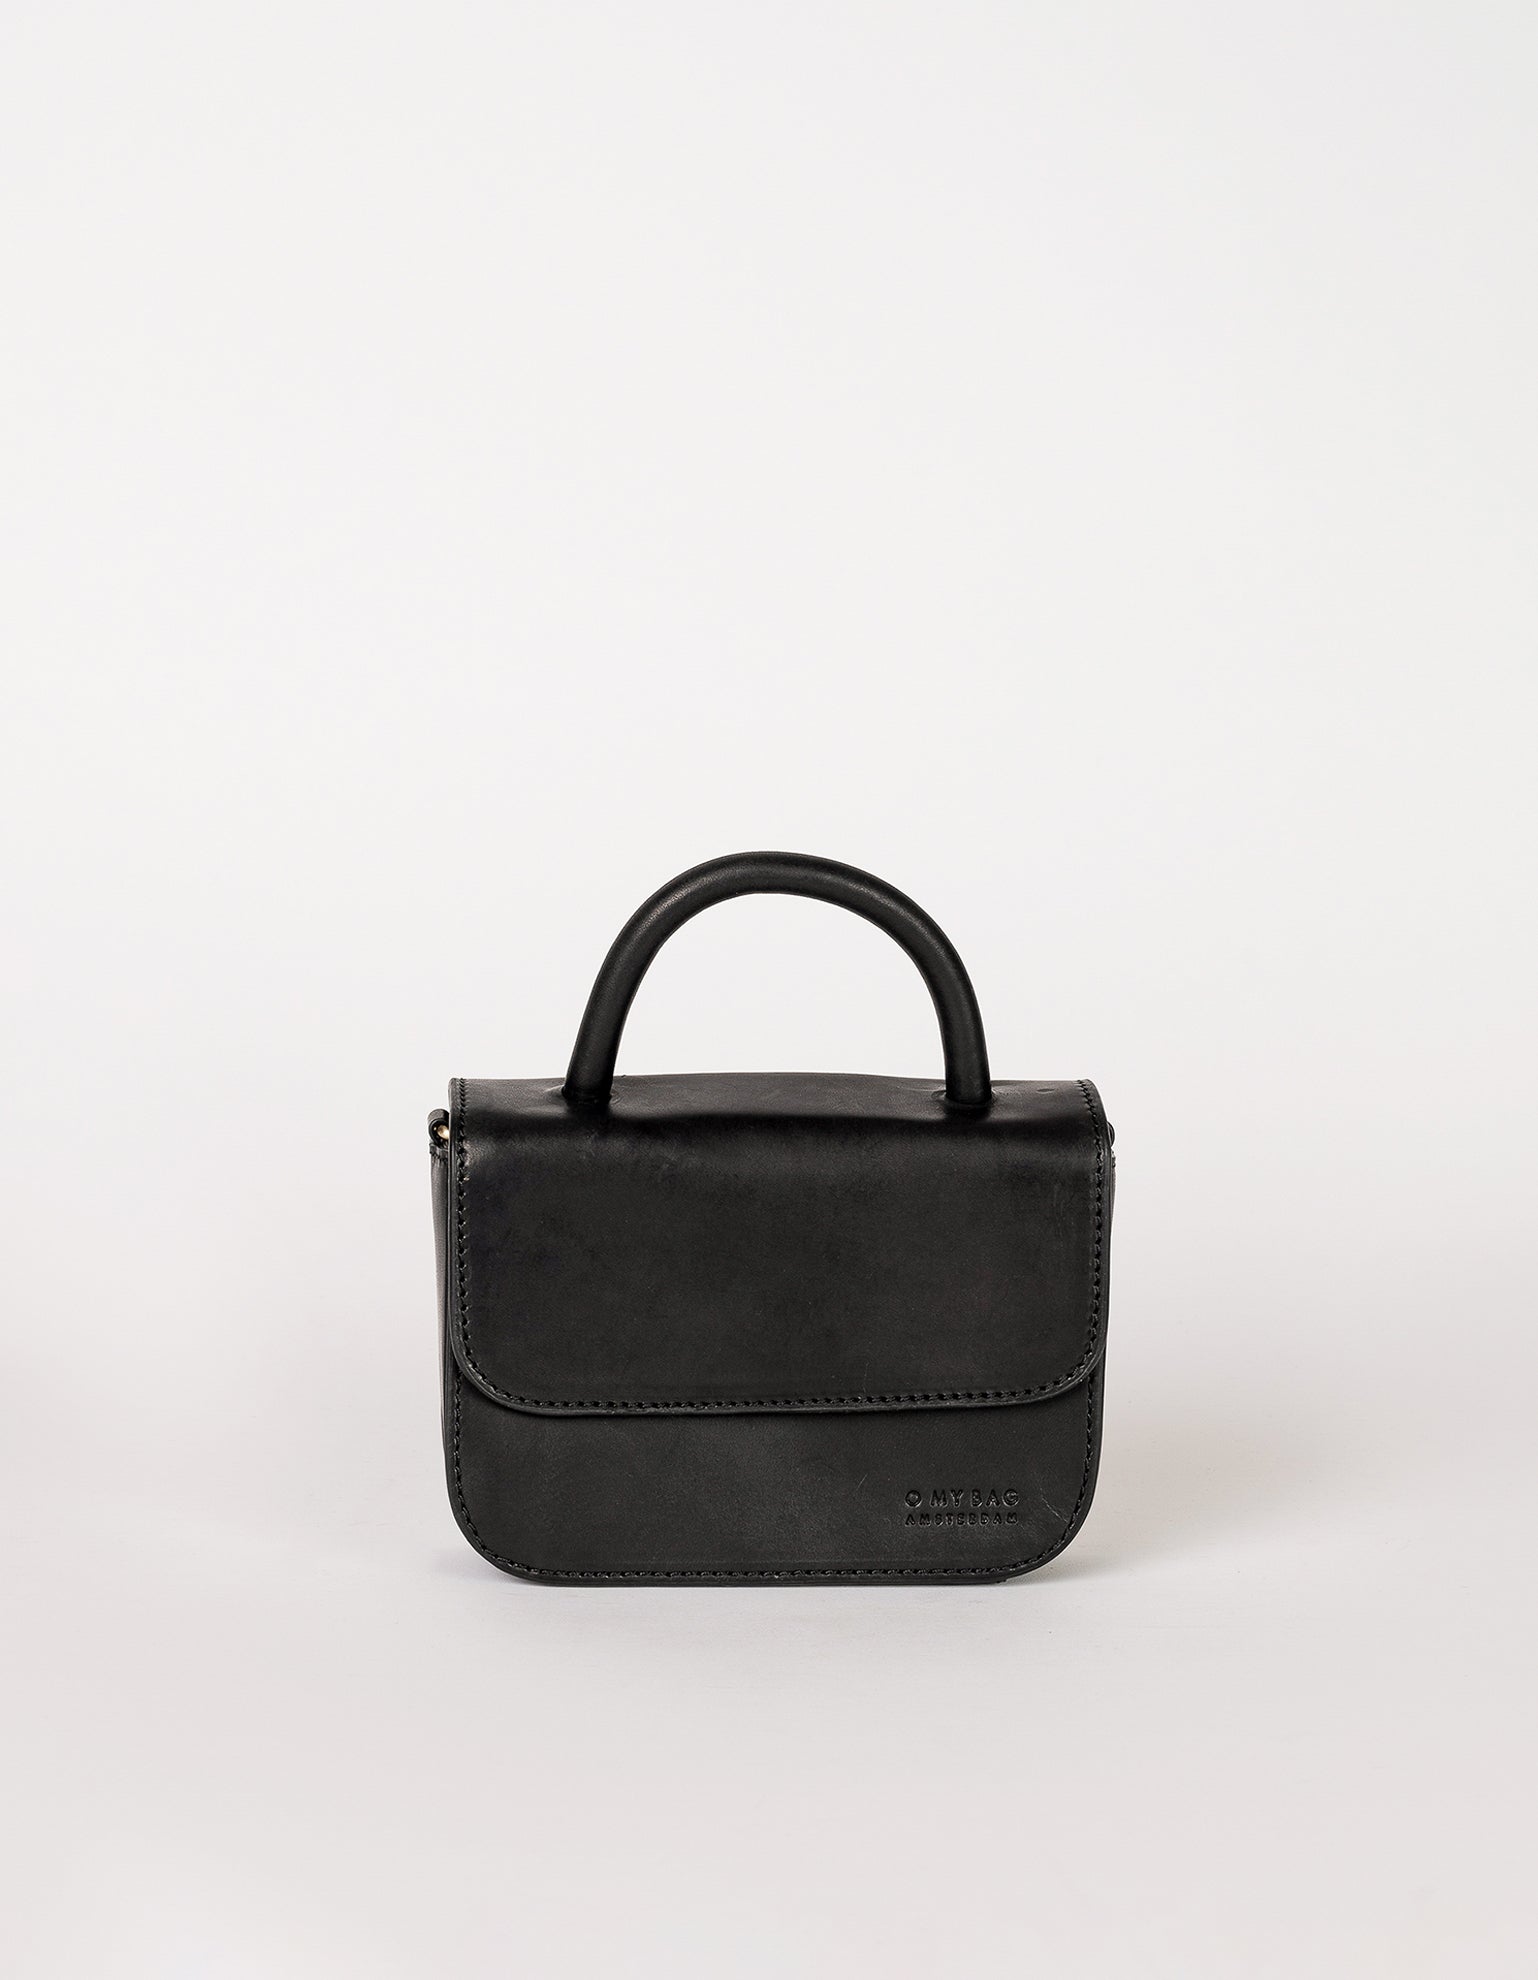 Nano Bag Black Classic Leather Front Product Image.